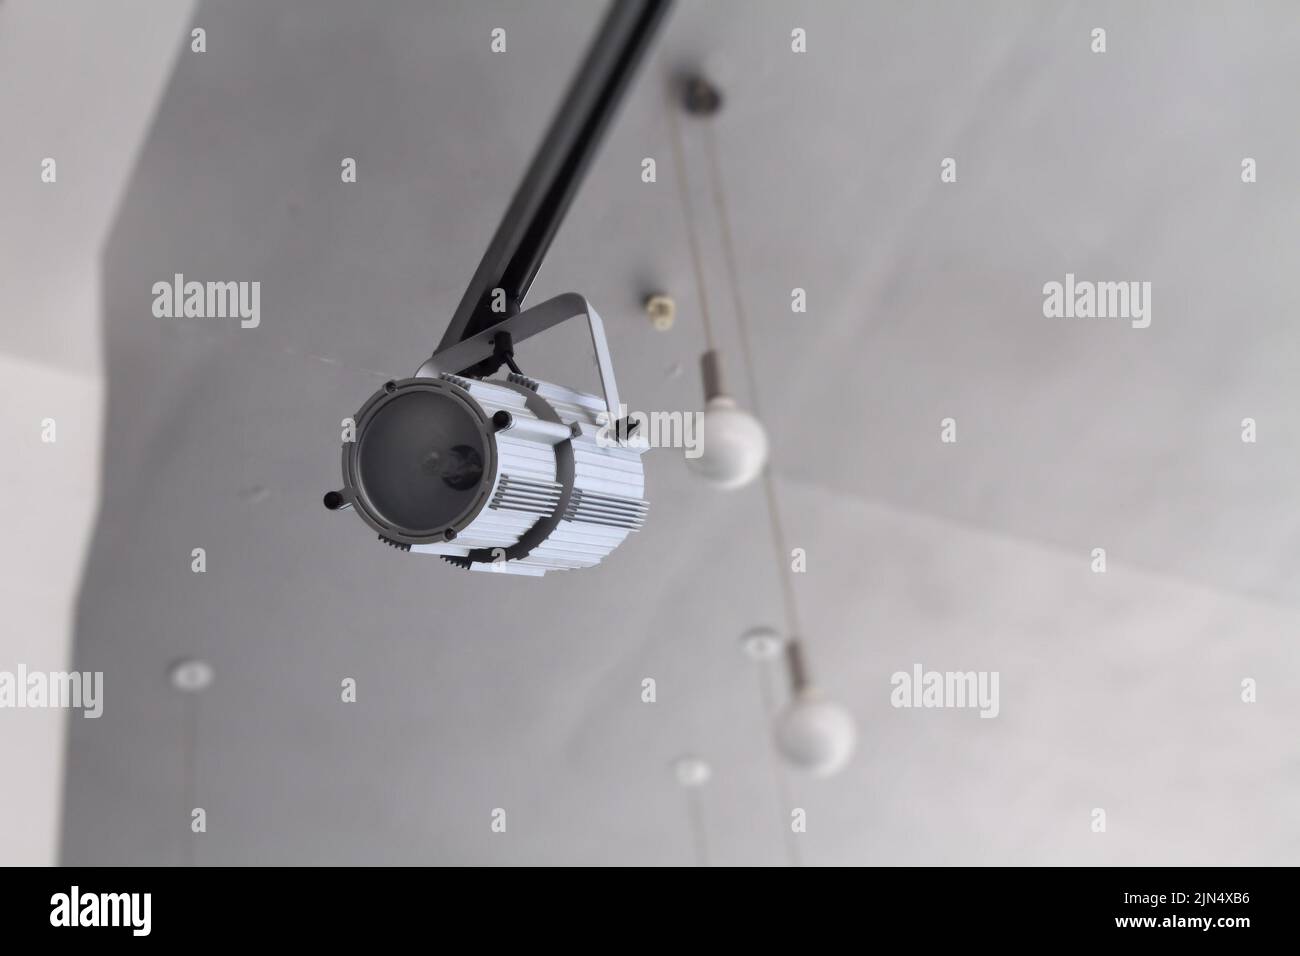 Accent spotlight on moving rail and ceiling lamps detailed photo Stock Photo